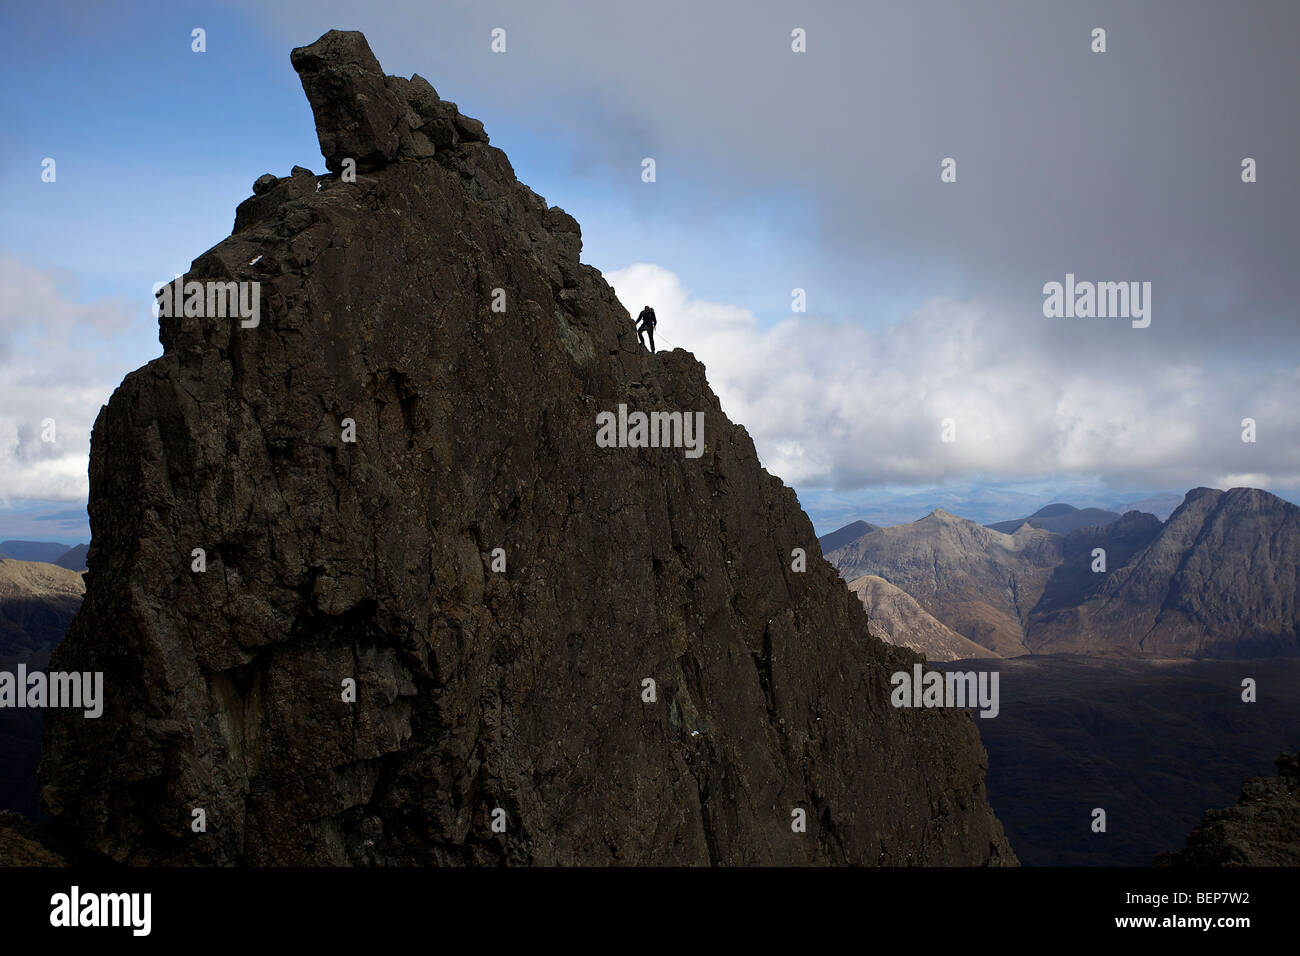 A climber on the Inaccessible Pinnacle, Isle of Skye, Scotland Stock Photo